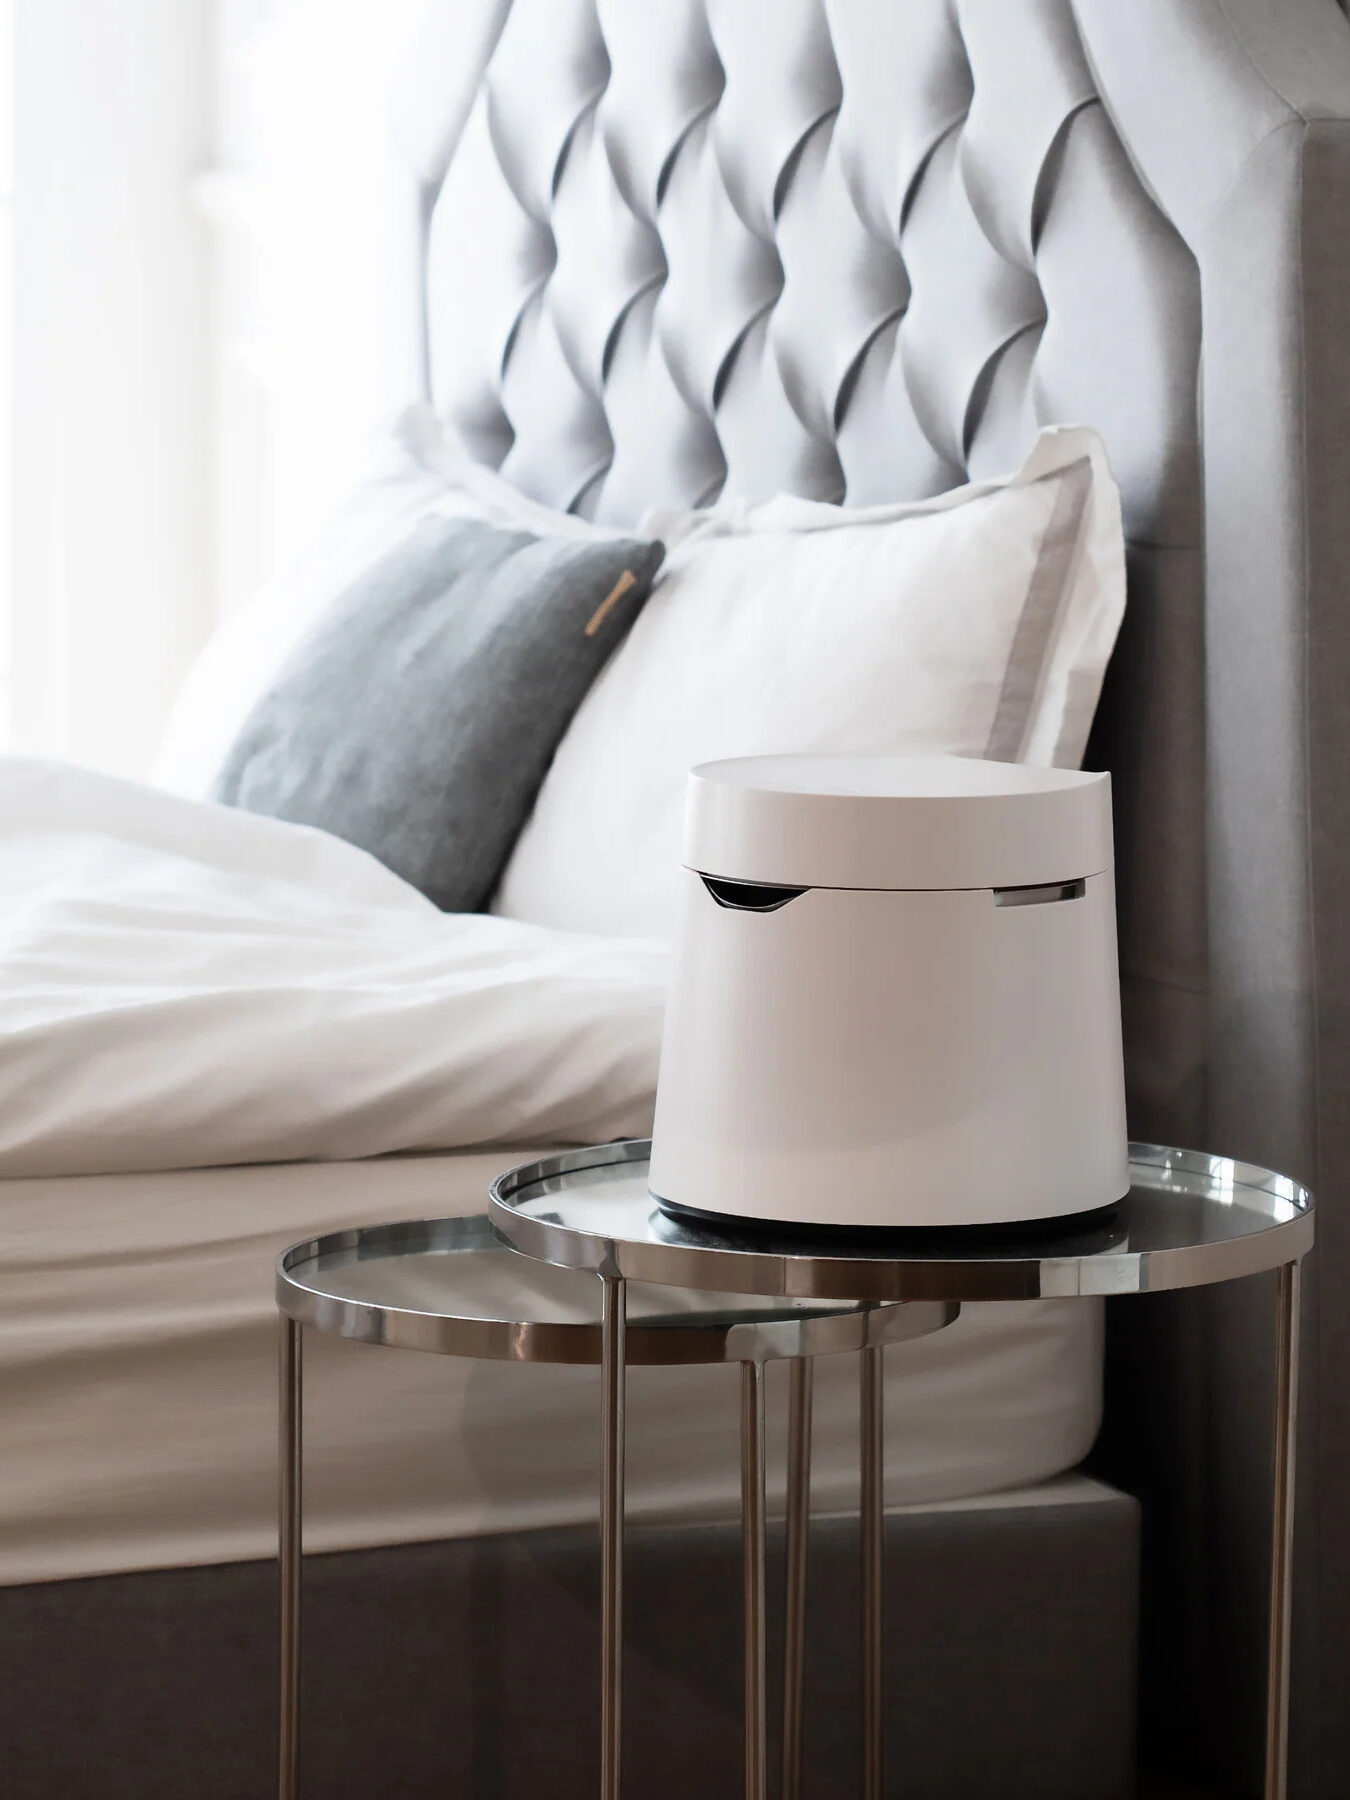 A Carepod Humidifier next to a bed on a side table.